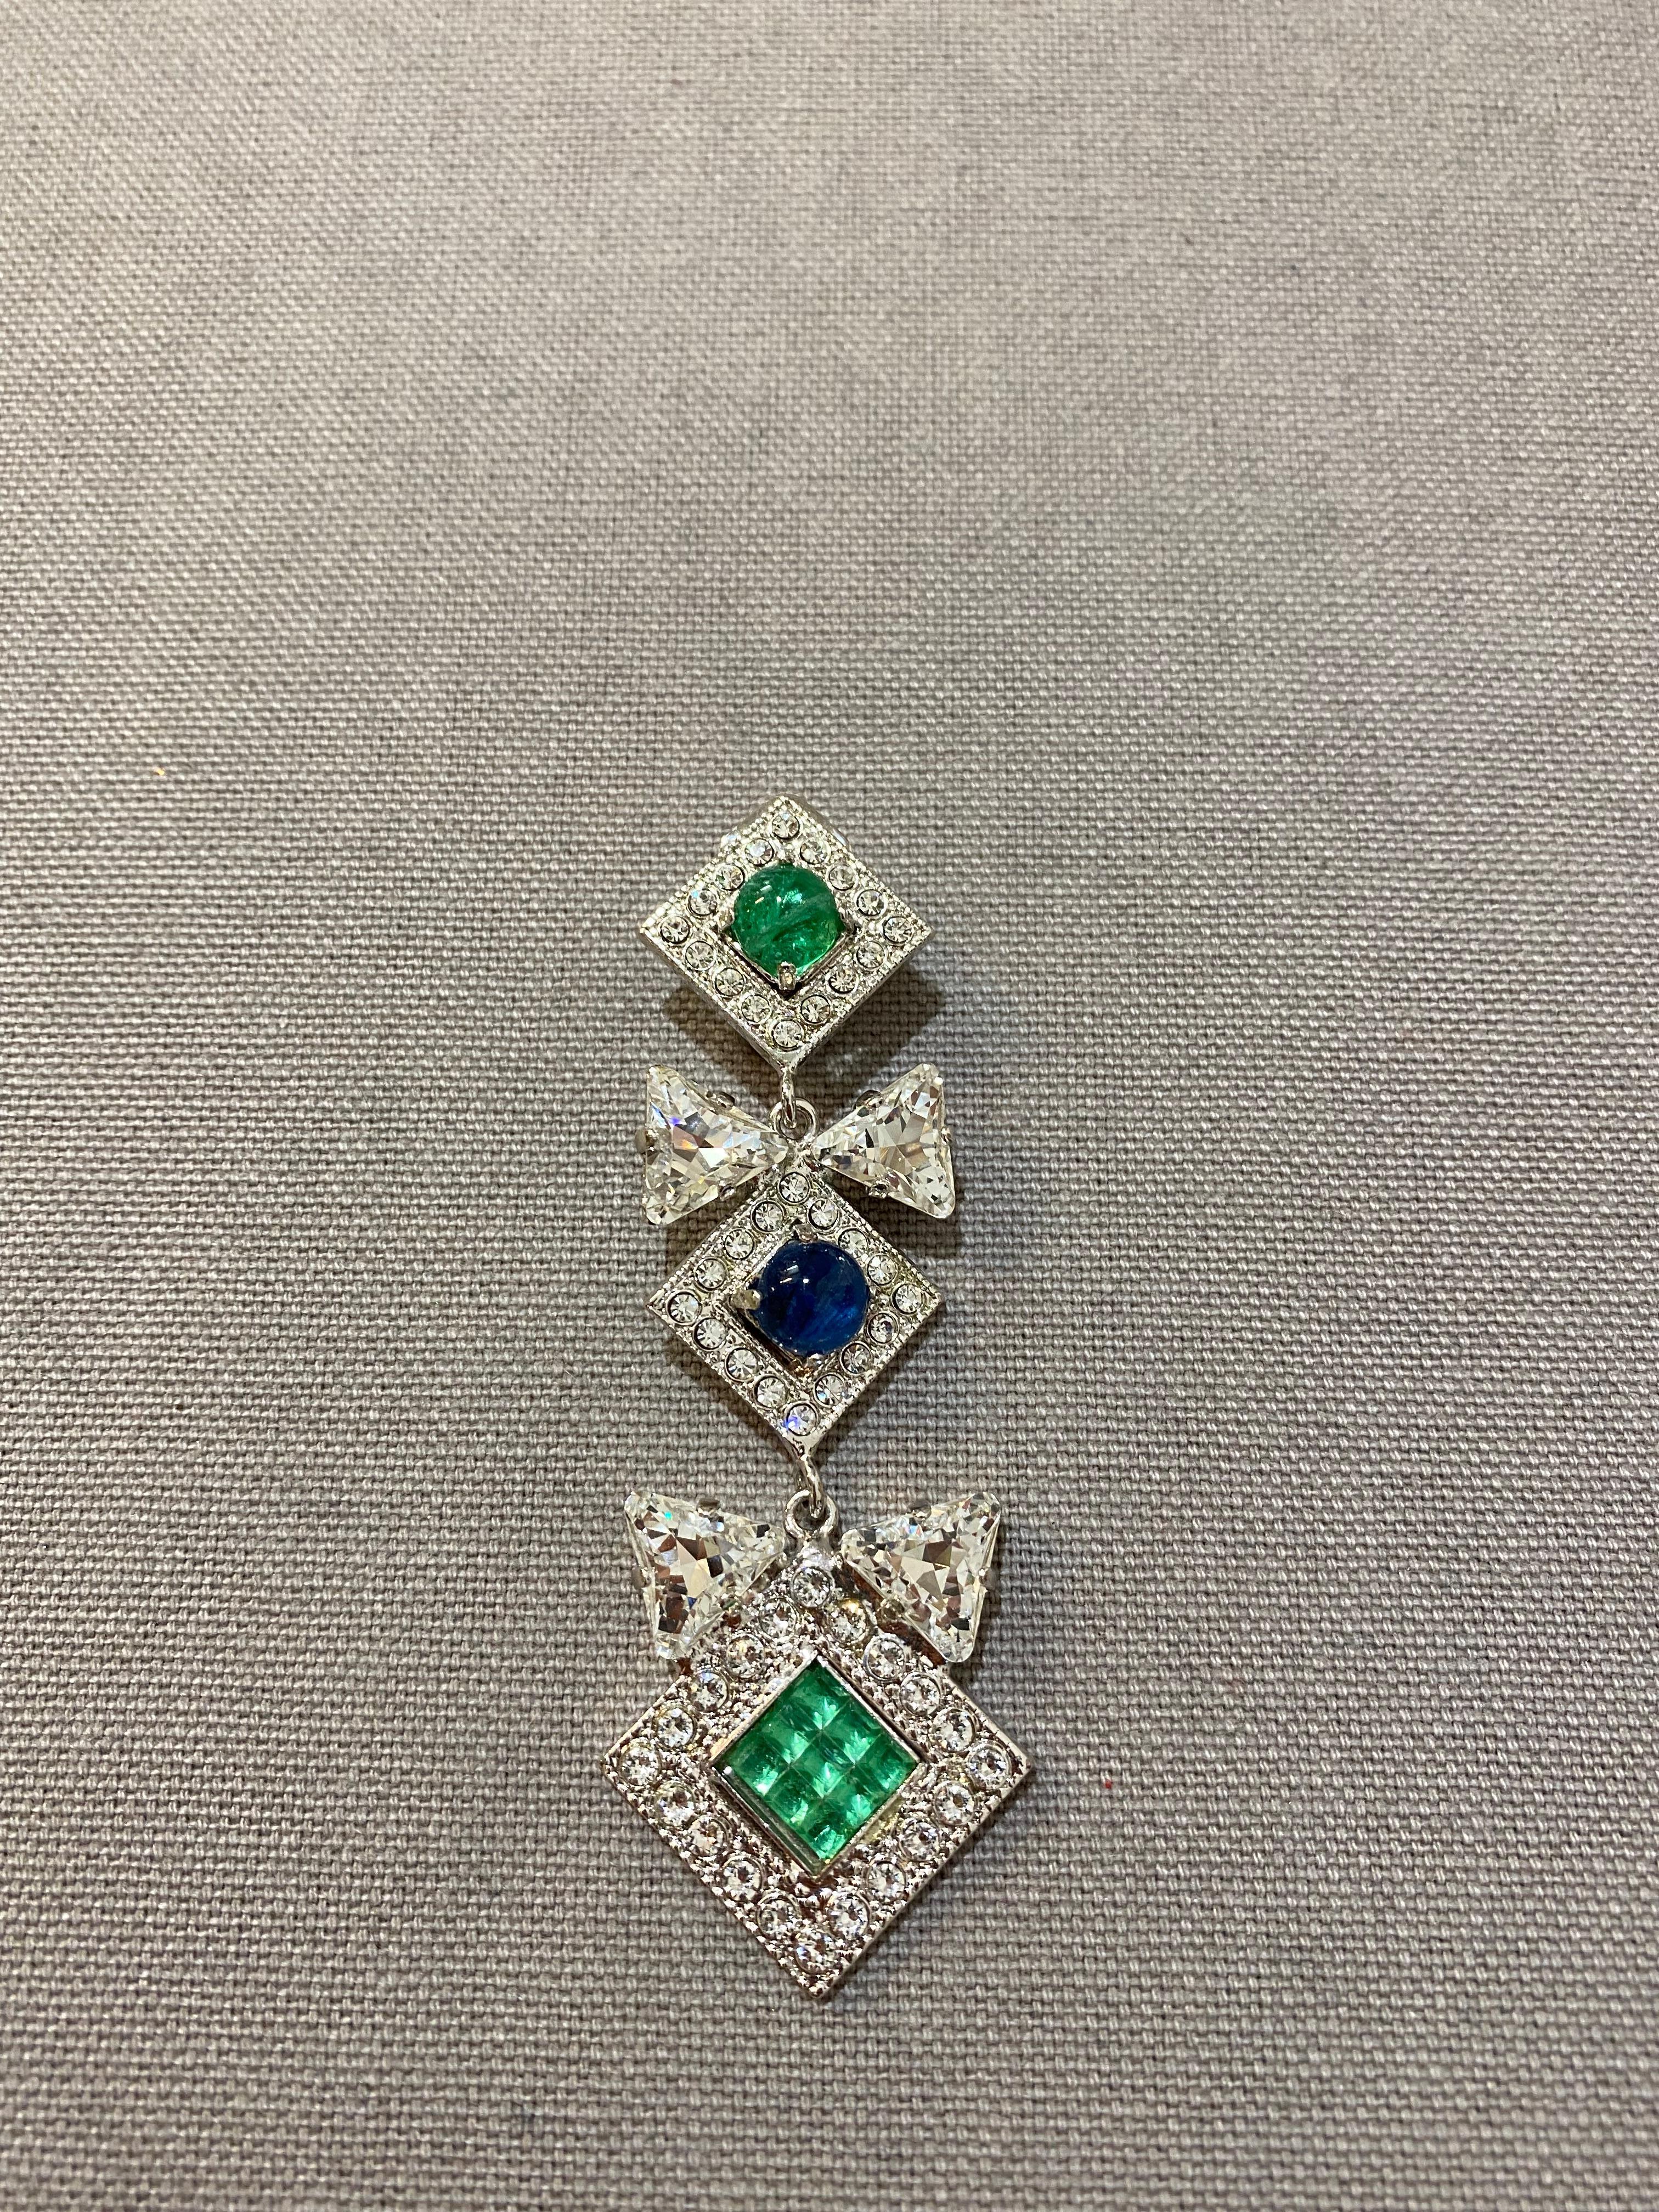 Stunning Carlo Zini bijoux earrings
Non allergenic rhodium
Wonderful construction of class A Swarovski crystals and zyrcons
Emerald and sapphire like elements 
Total length cm 8,5 (3.34 inches)
Clip on closure, pierced on request
100% Artisanal